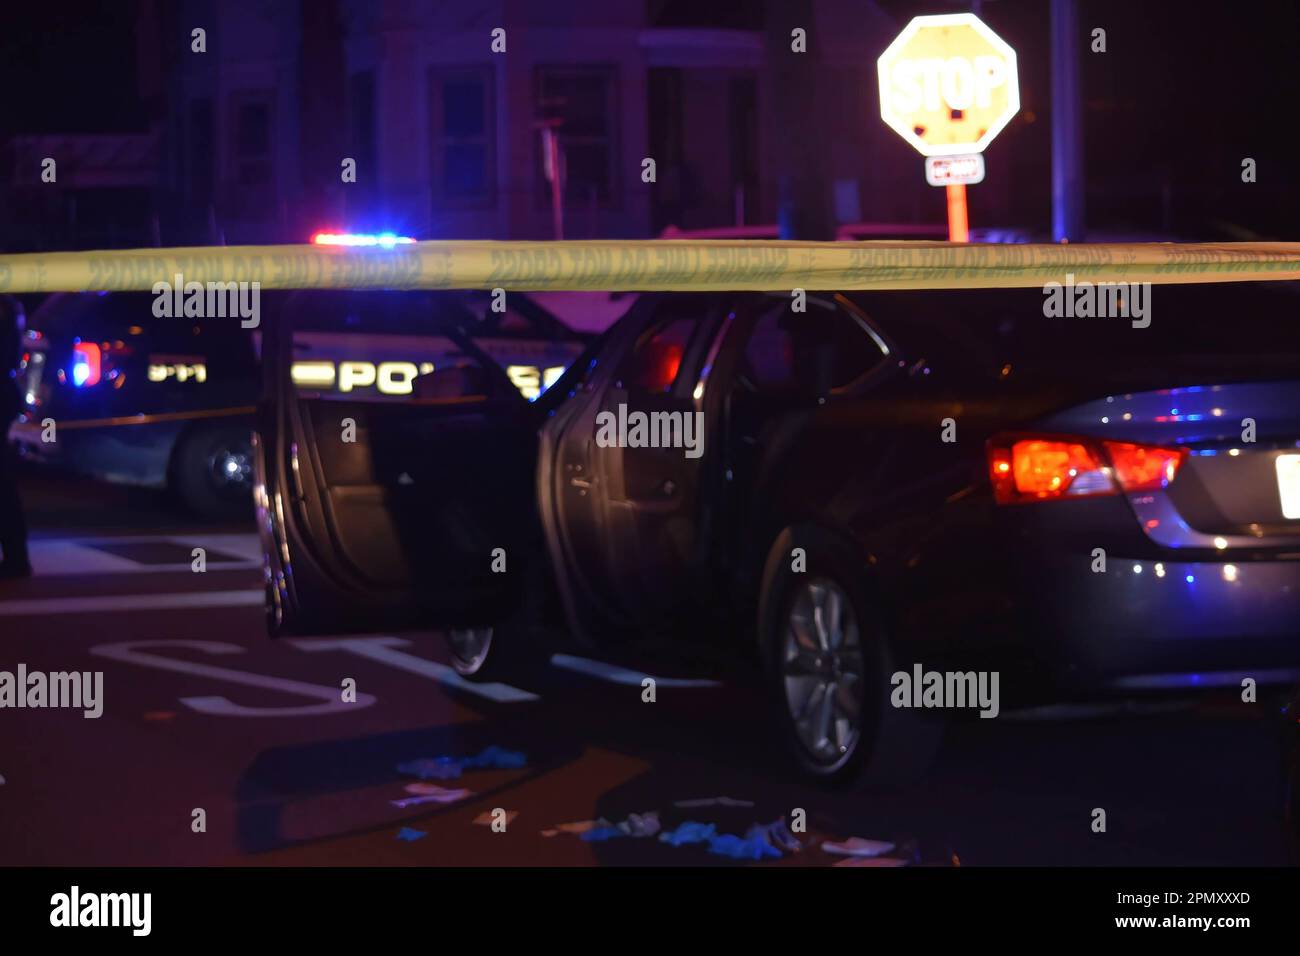 Paterson, USA. 15th Apr, 2023. Investigators gather near a vehicle in the area of East 22nd Street. Four people reported shot in a shooting in Paterson, New Jersey, United States in the early morning hours of Saturday, April 15, 2023. Reportedly, four people were shot early Saturday morning after 12:00 AM in Paterson, some of the victims were transported by EMS and some victims were transported by private vehicles. No further information was immediately available from the Paterson police department. There are several crime scenes. One crime scene in the area of East 22nd Street had a Stock Photo